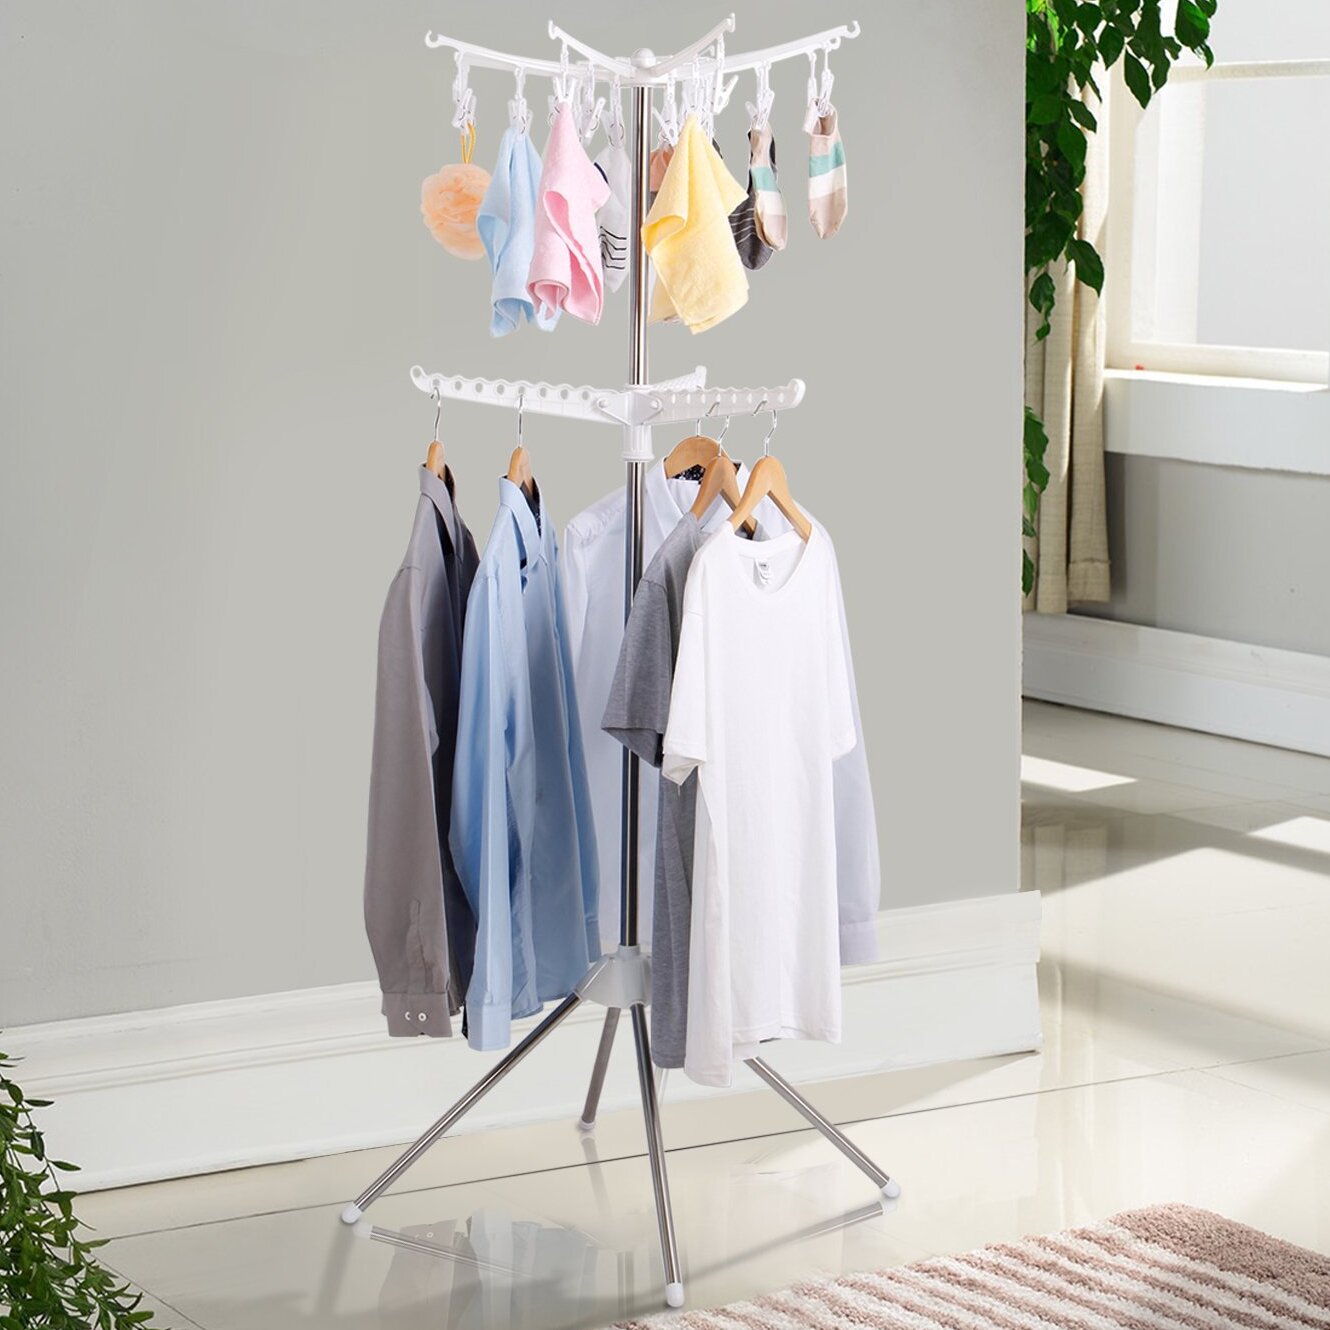 Lifewit Collapsible Clothes Airer with Clips Portable 3-Tier Towel Clothes Drying Rack for Hanging Laundry 